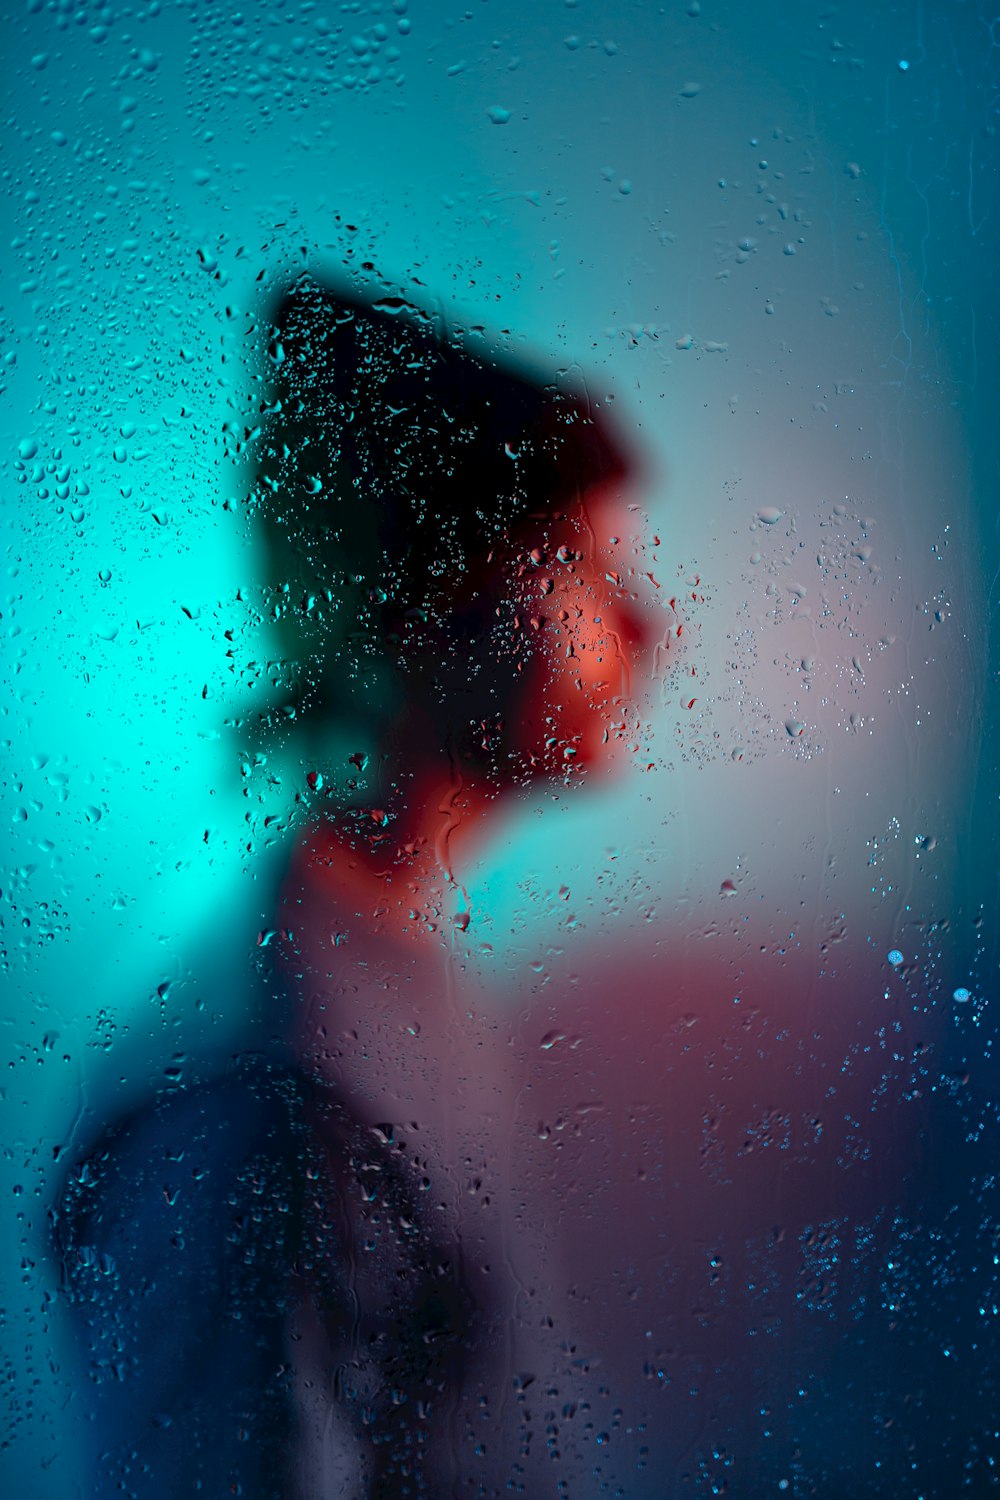 person in water with water droplets